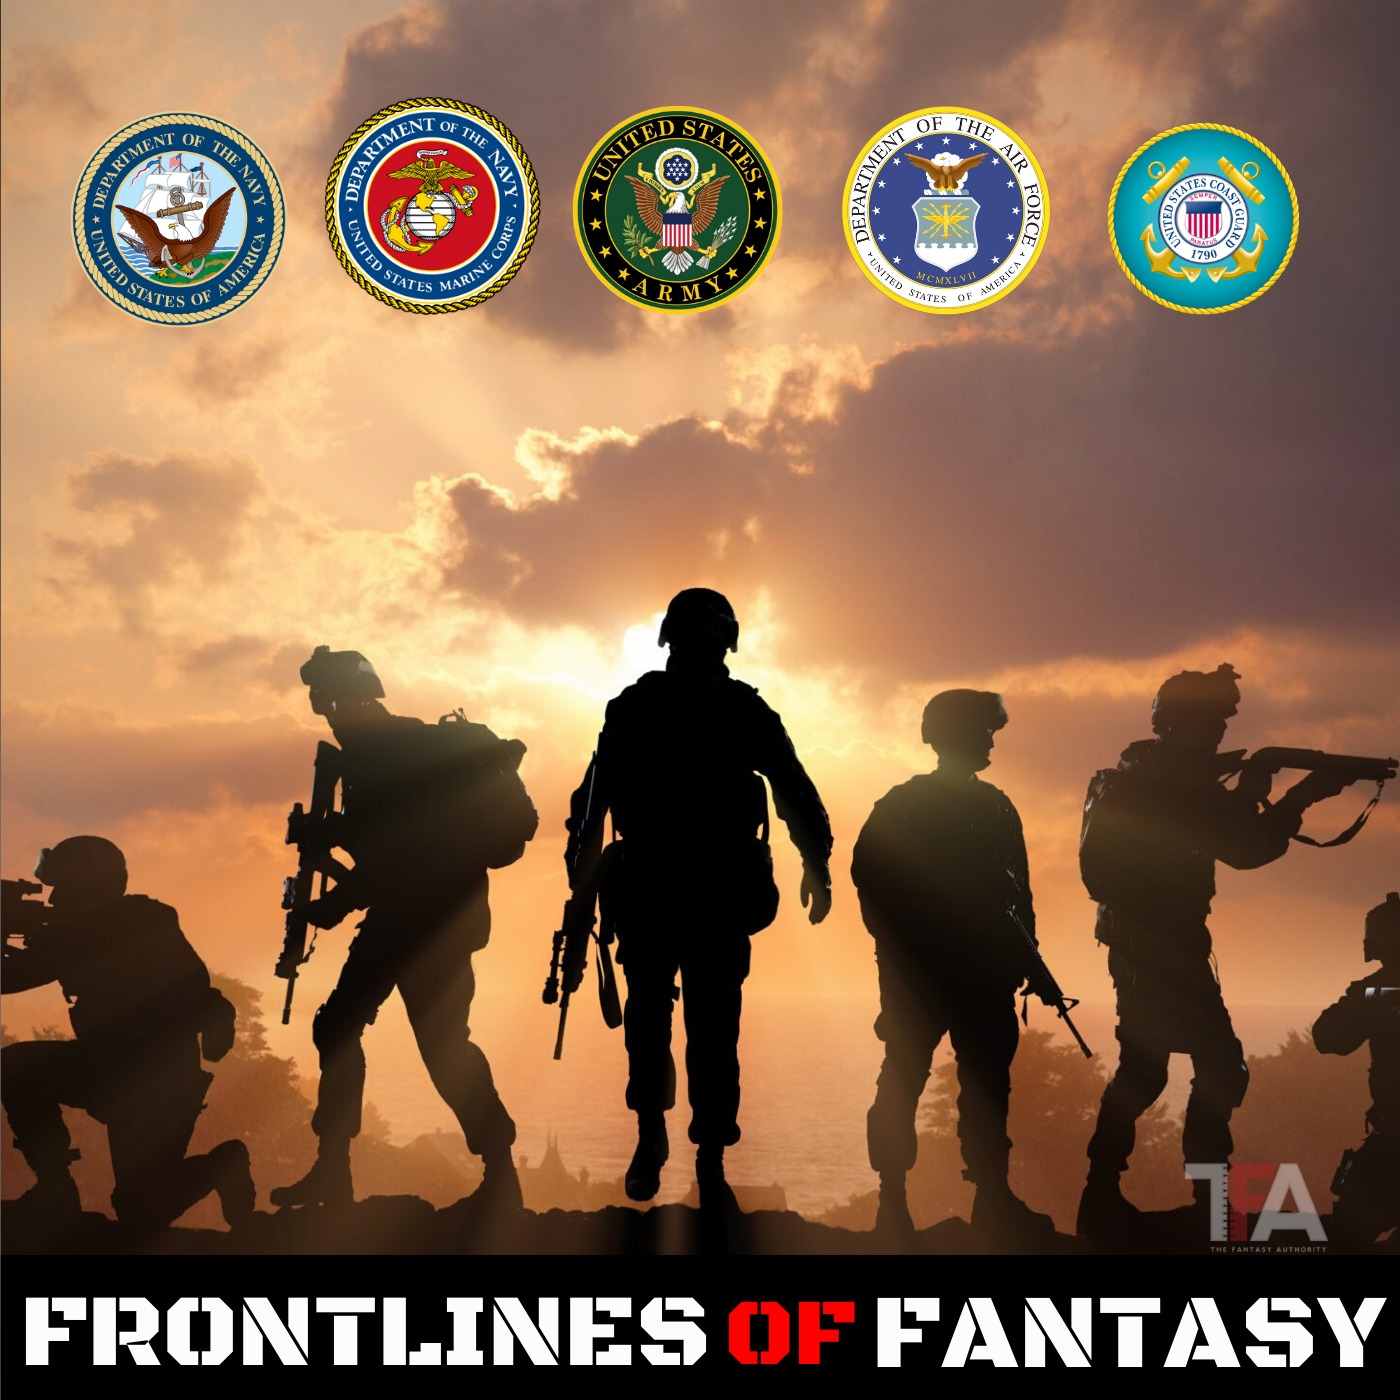 Frontlines of Fantasy - US Navy Eric Ludwig - Ep 2